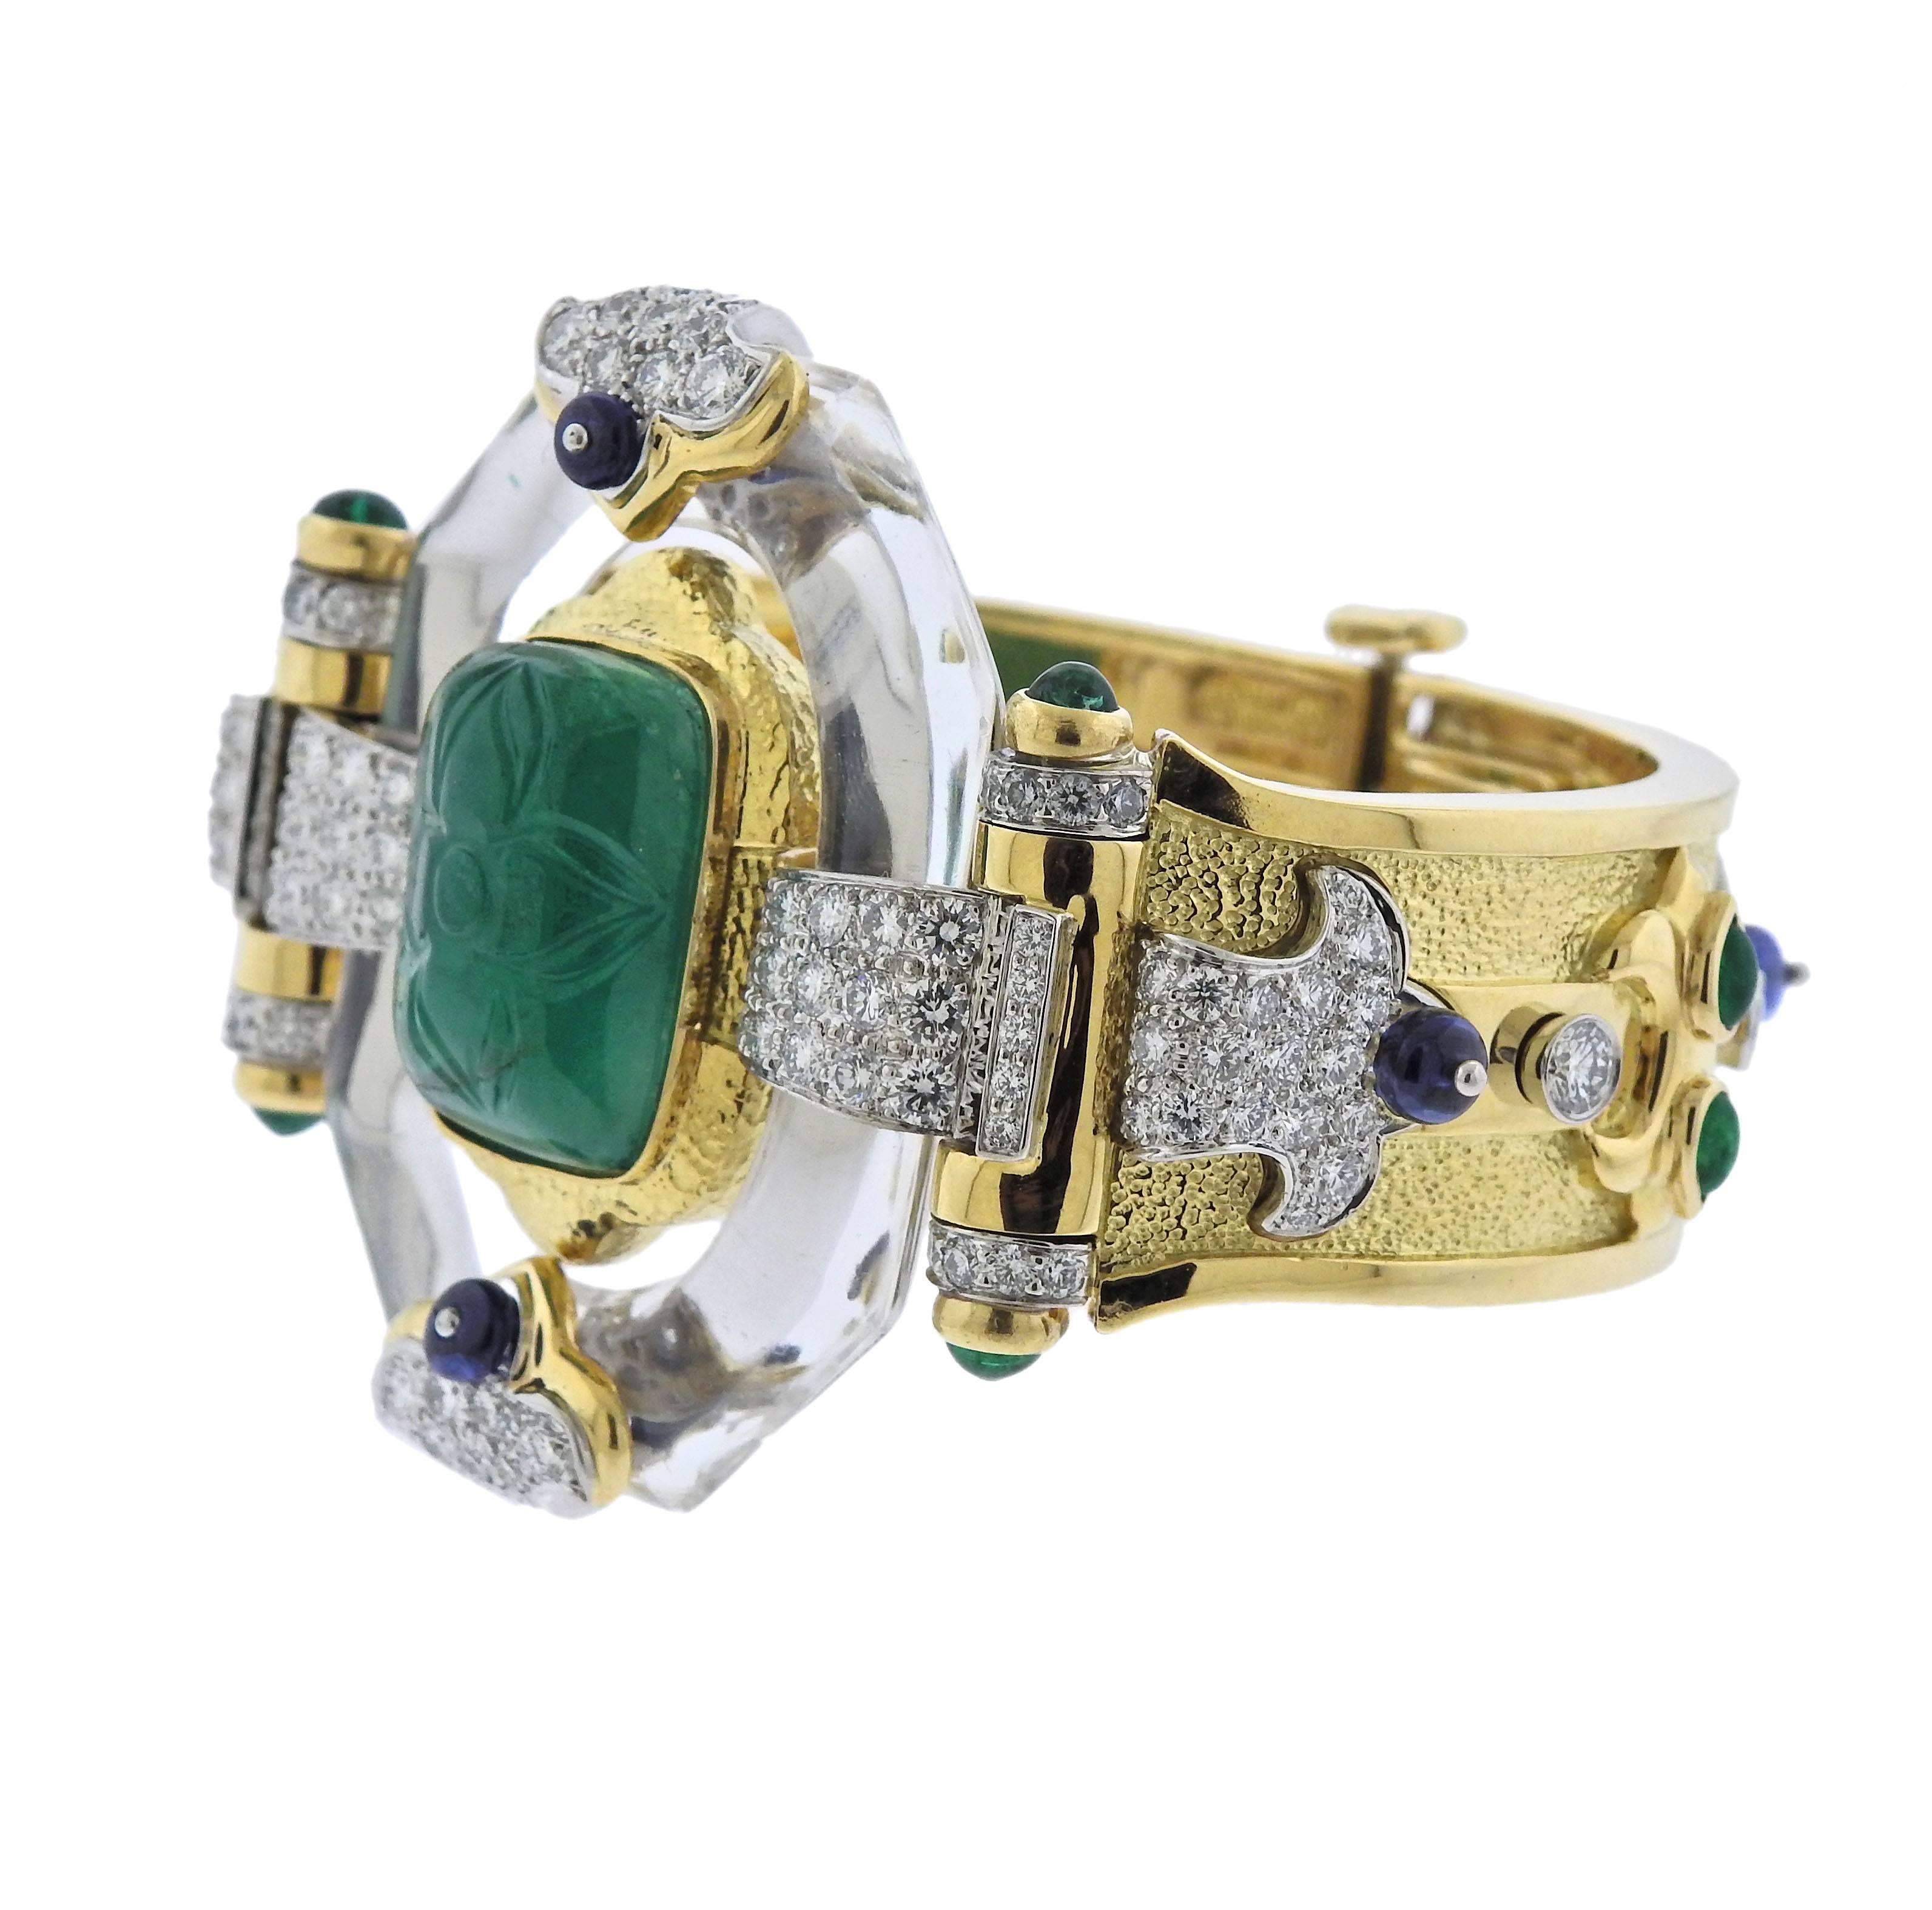  Impressive one of a kind bracelet, crafted by David Webb, decorated with approx. 20cts carved emerald, 1.34ctw in emerald cabochons, 5.09ctw GH/VS diamonds and 2.91ctw in sapphires and rock crystal. Comes with Webb COA. Bracelet will fit approx.